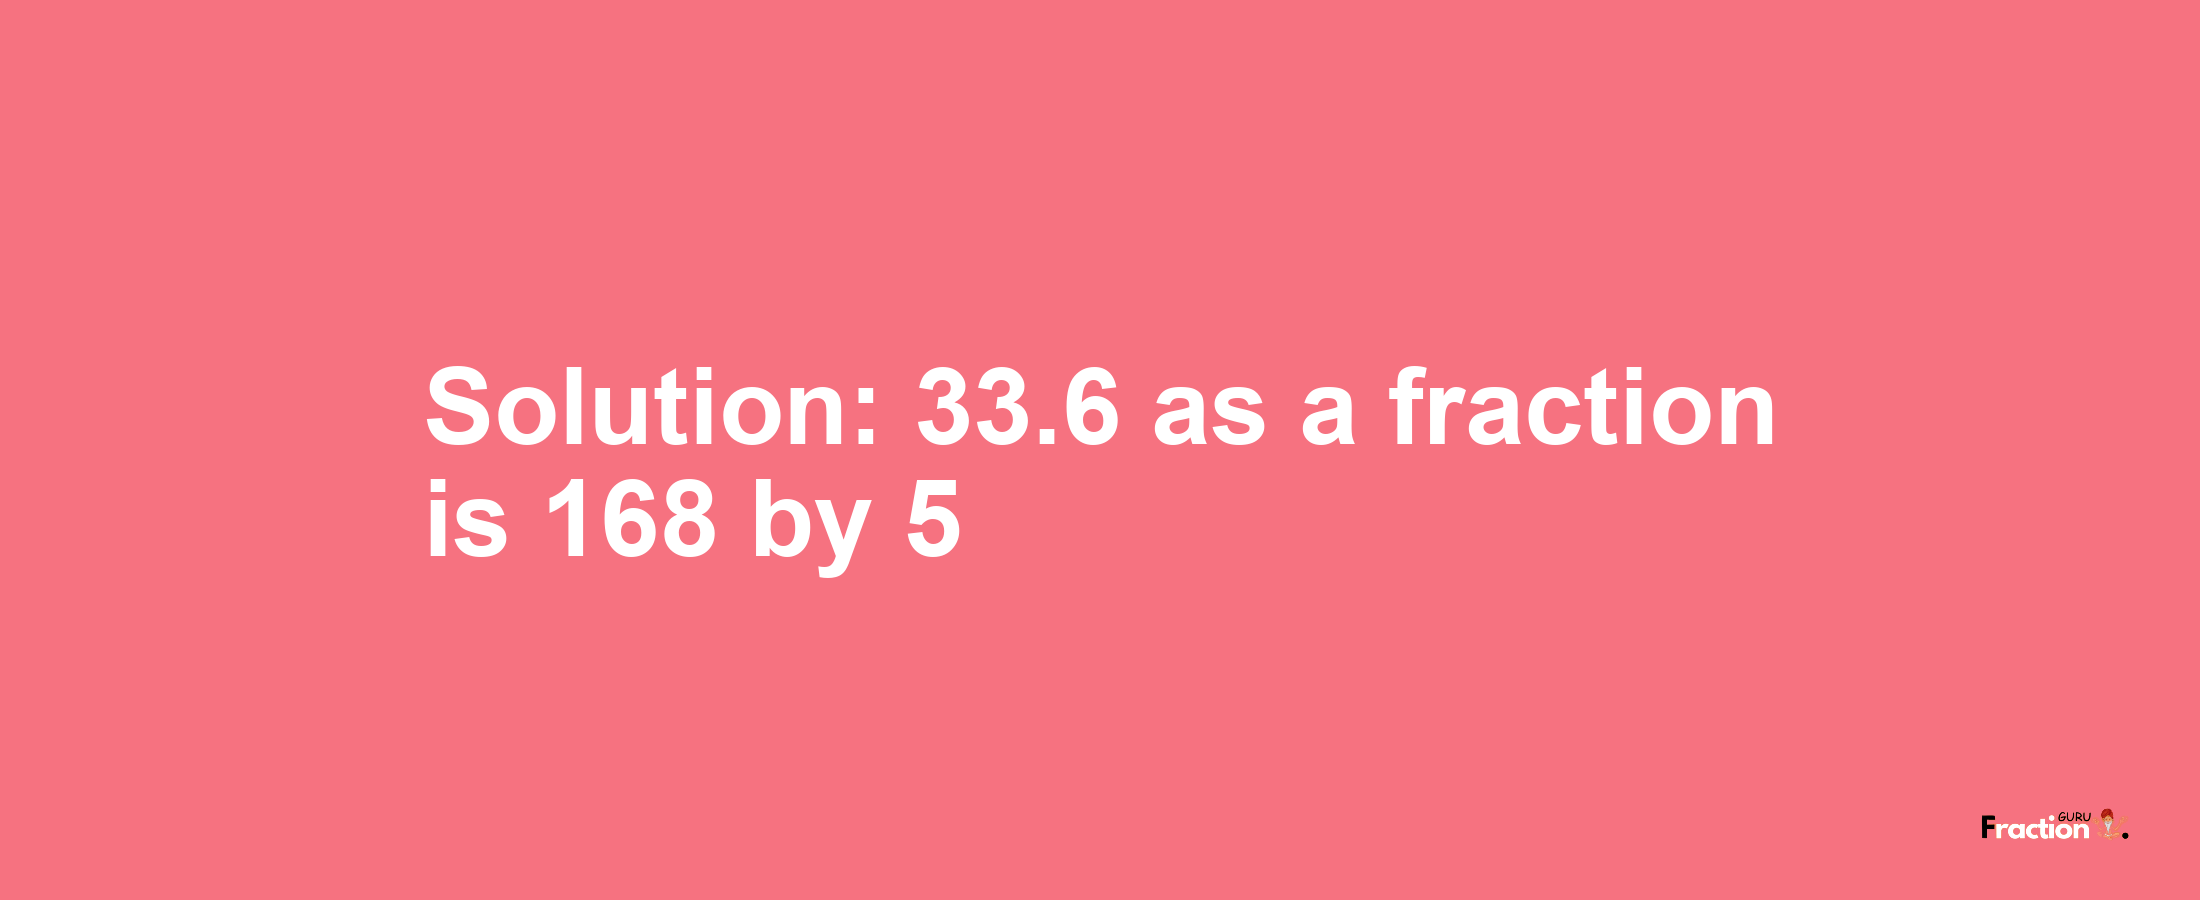 Solution:33.6 as a fraction is 168/5